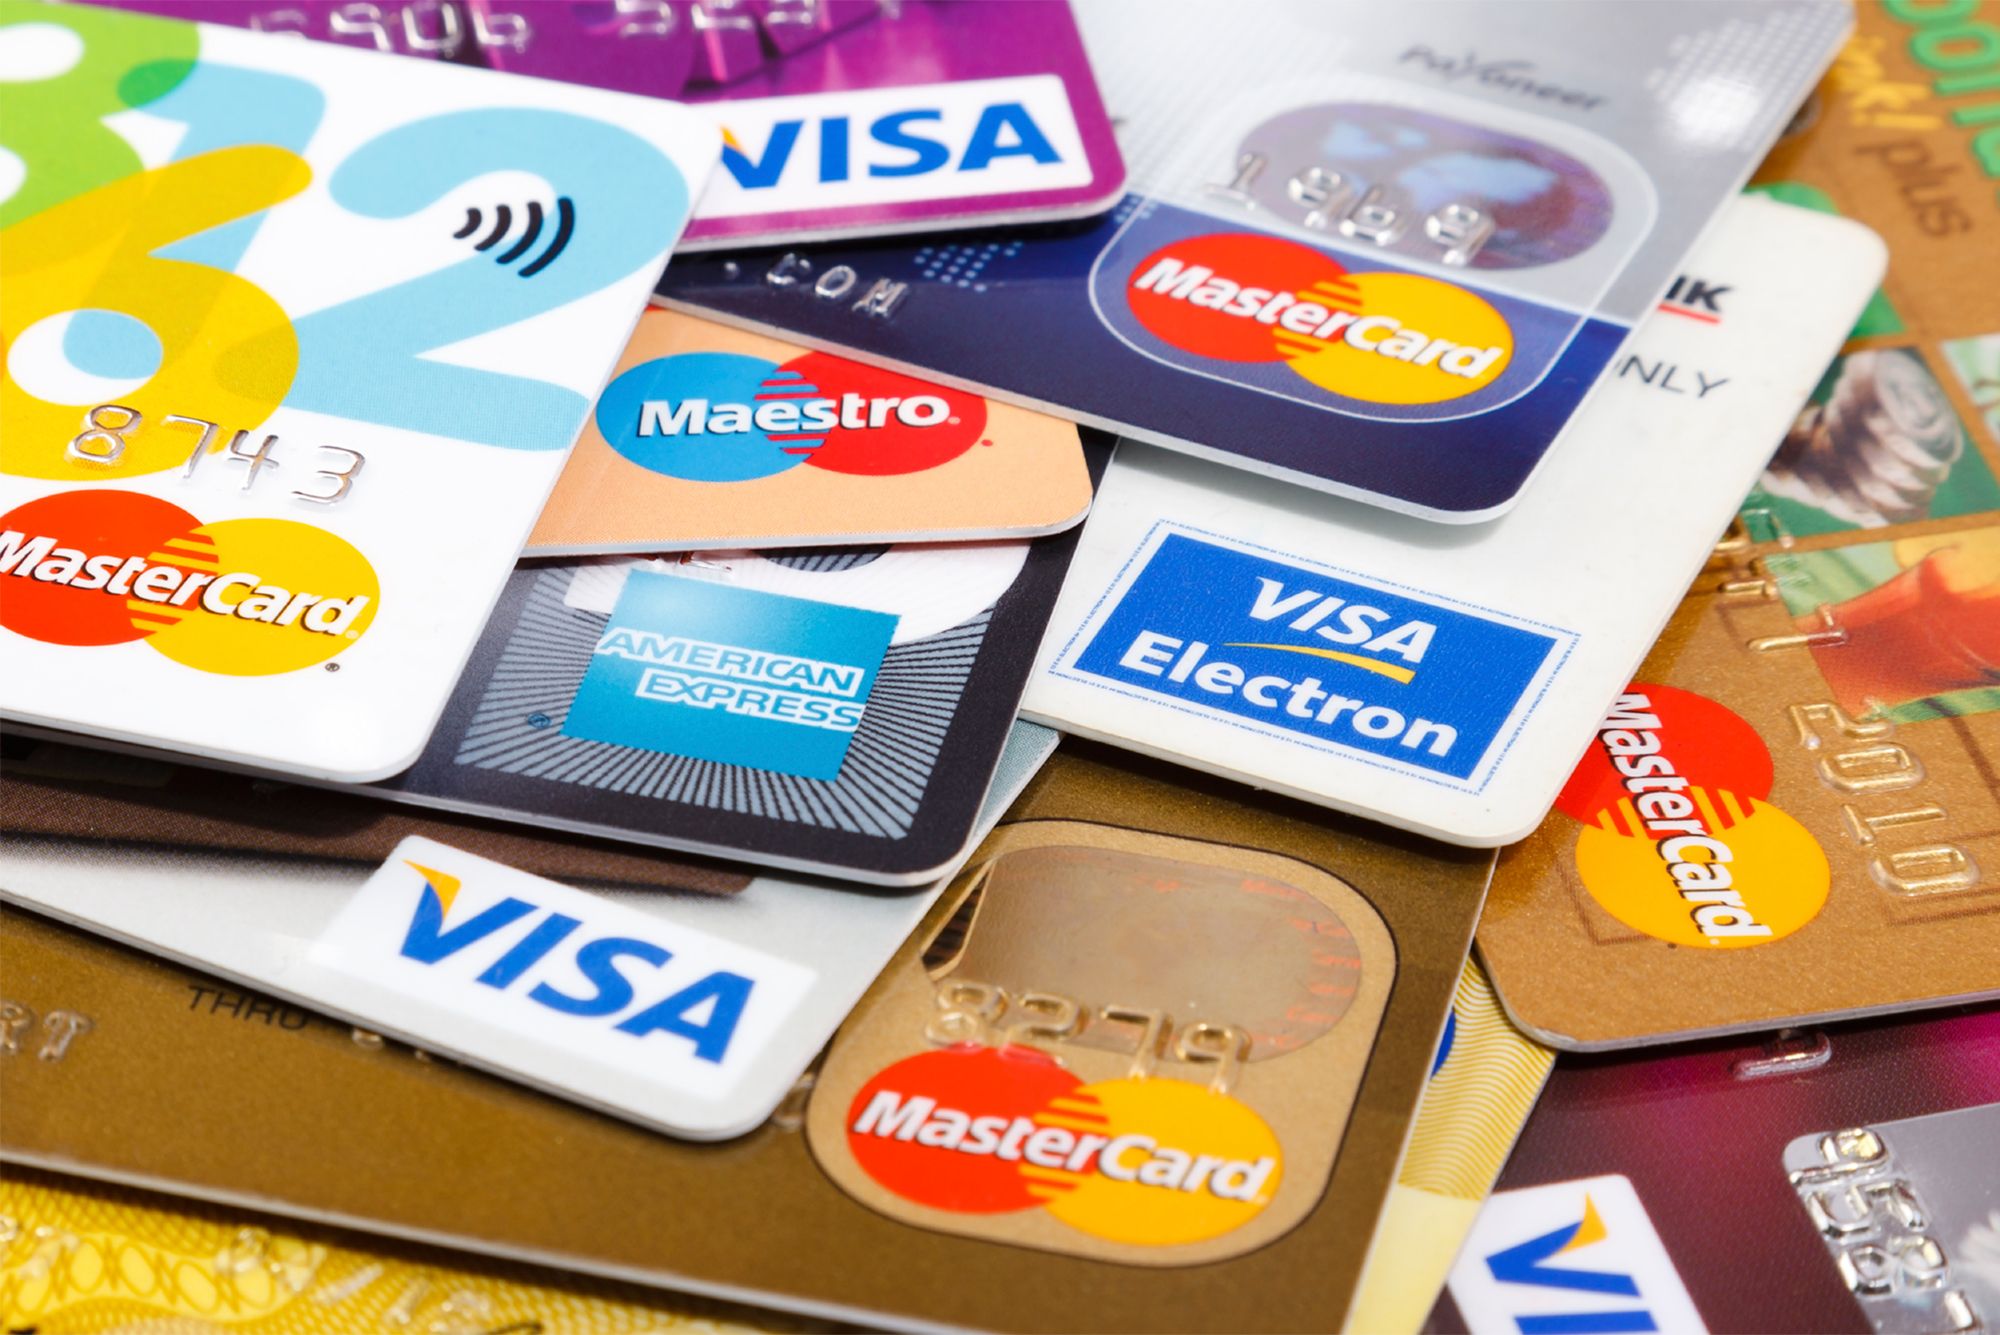 Choosing the best Credit Card for yourself? What should you look for before making a decision?